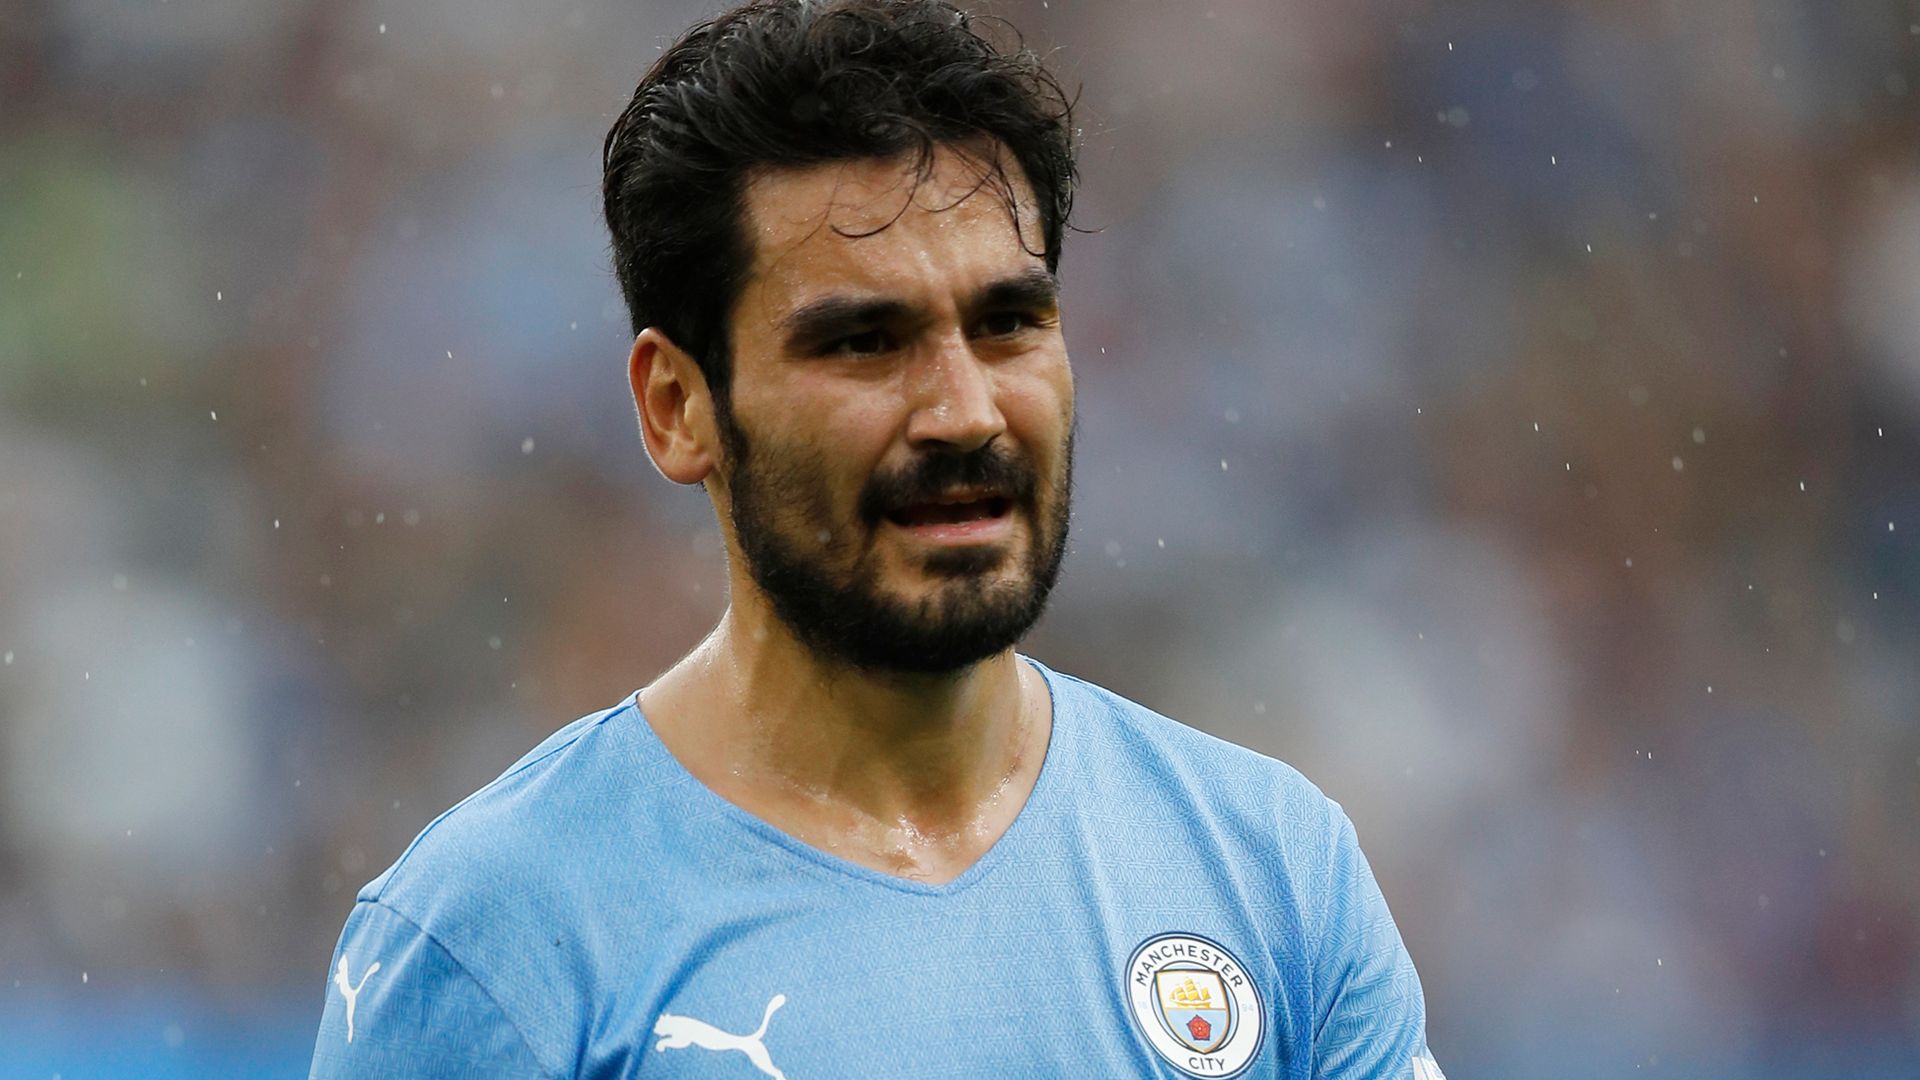 Gundogan to pay for 5,000 trees to be planted